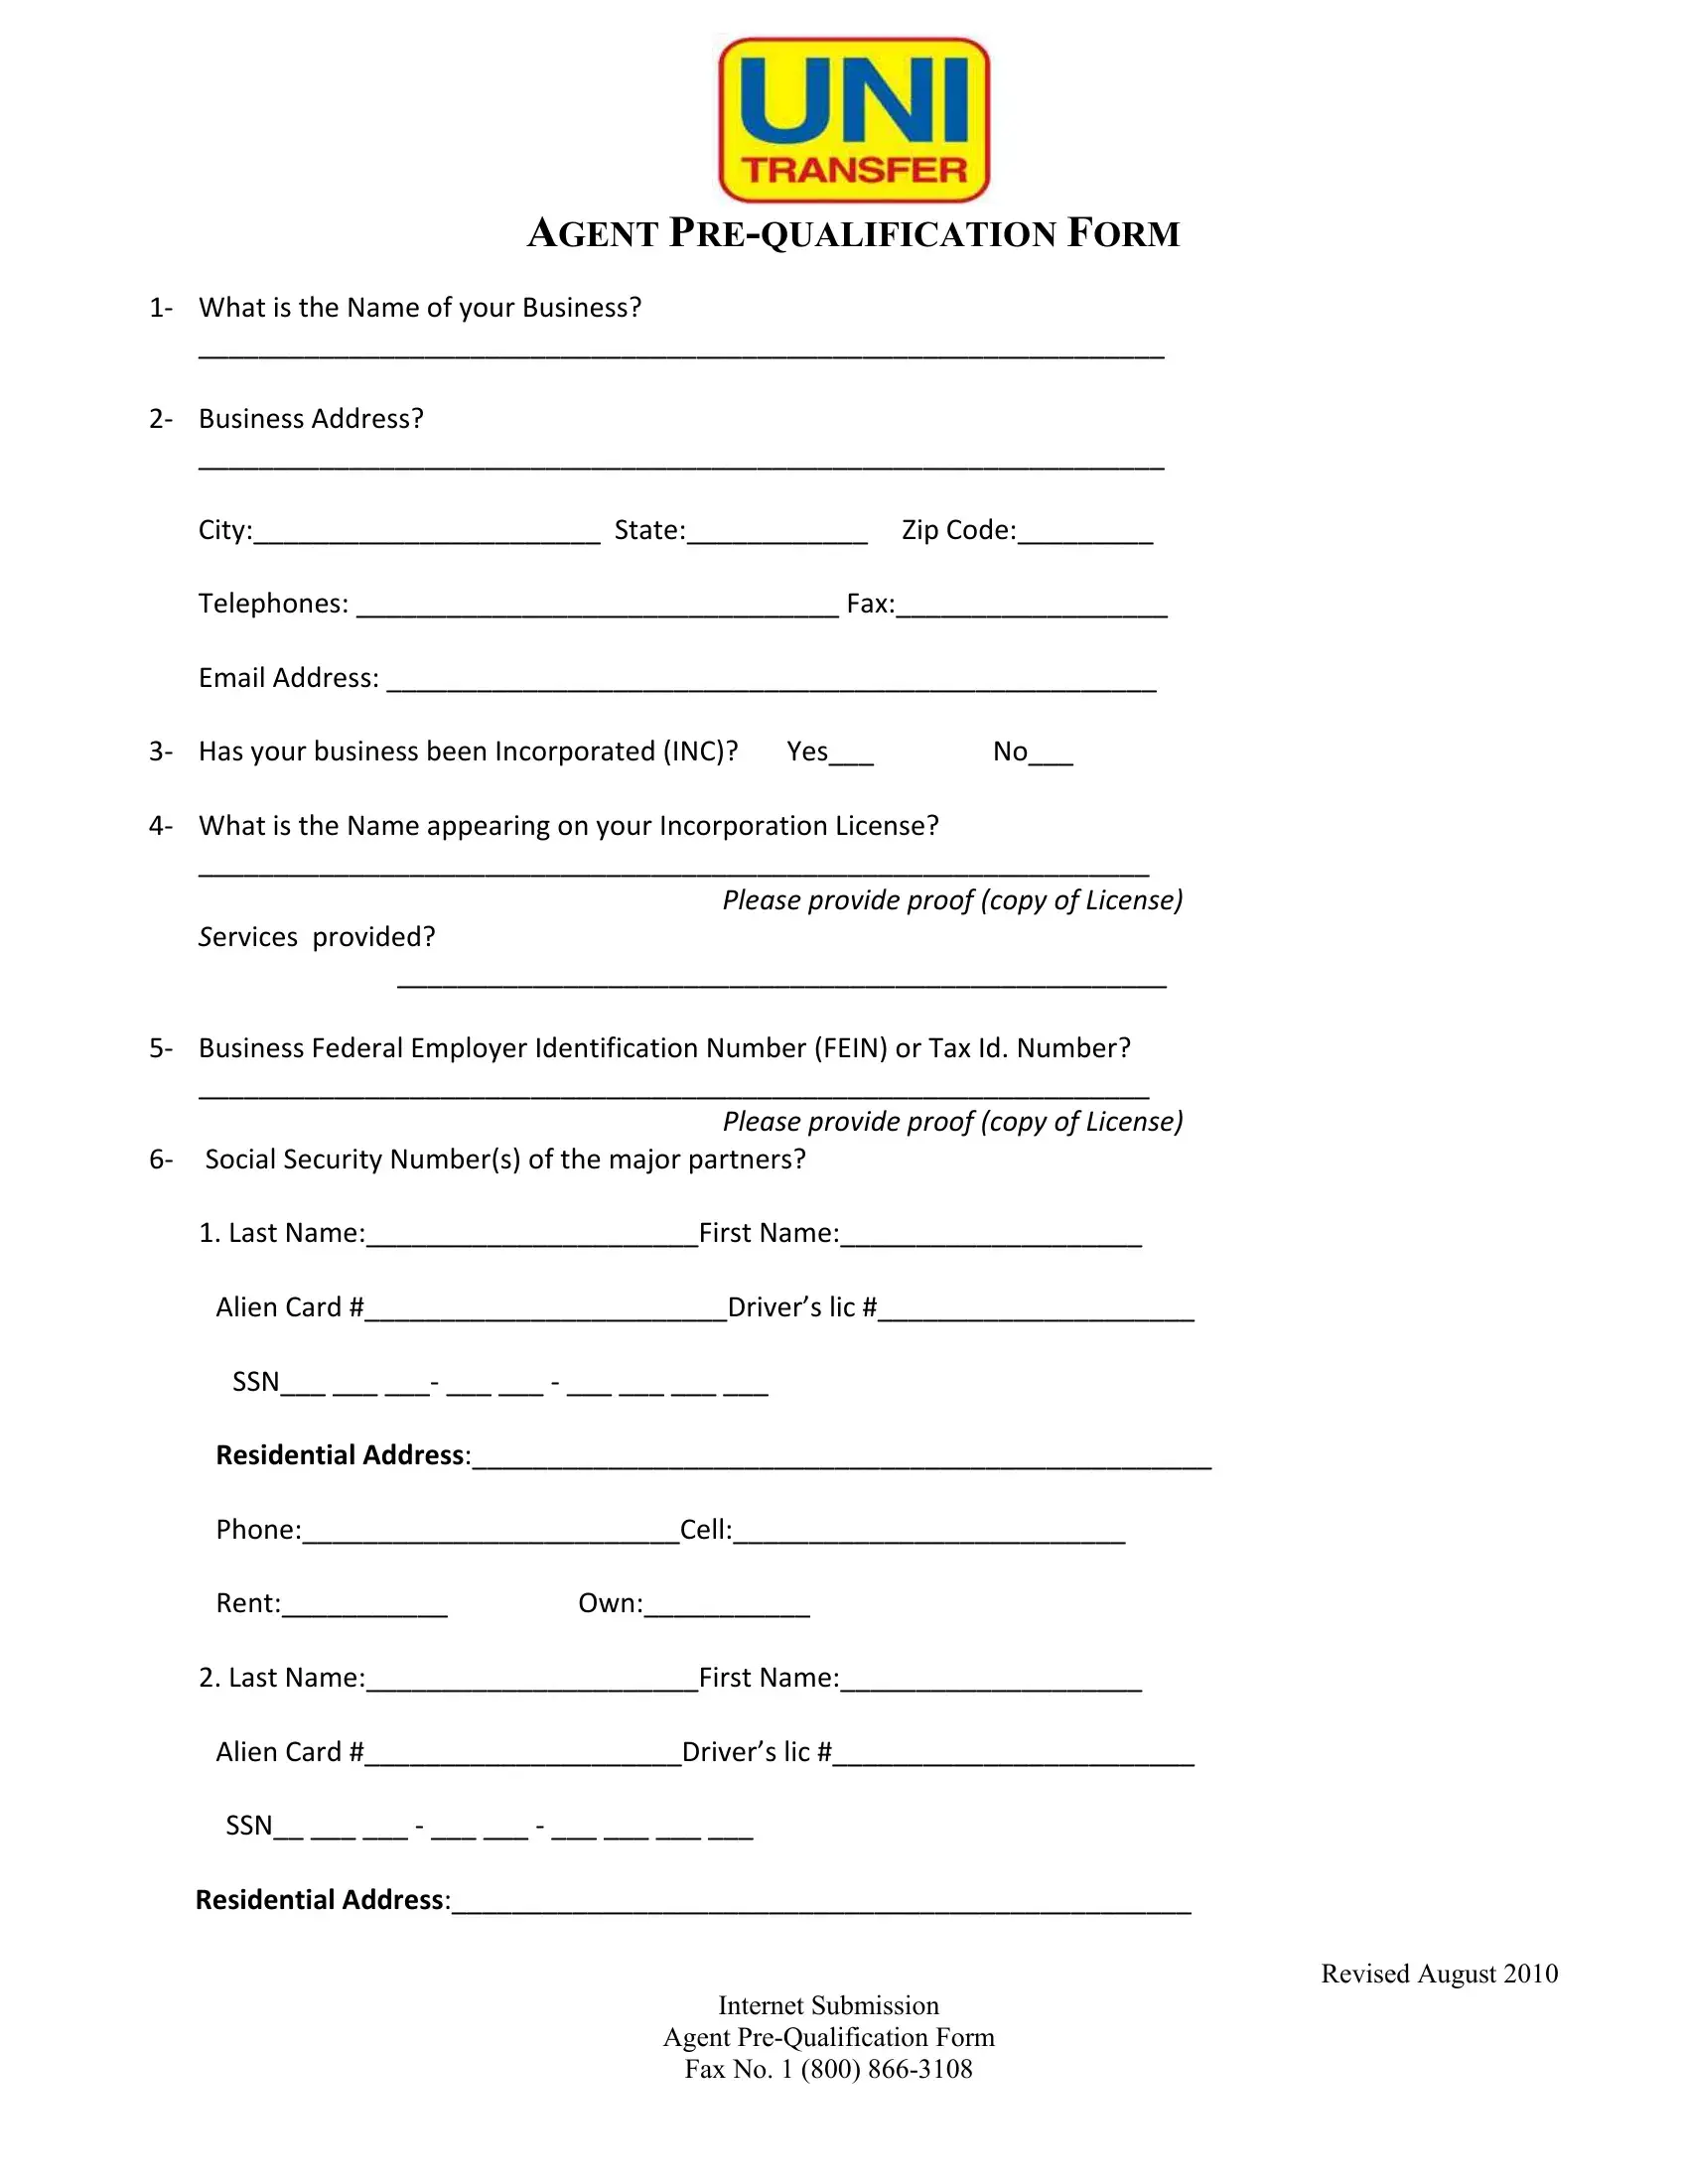 Agent Prequalification Form Preview